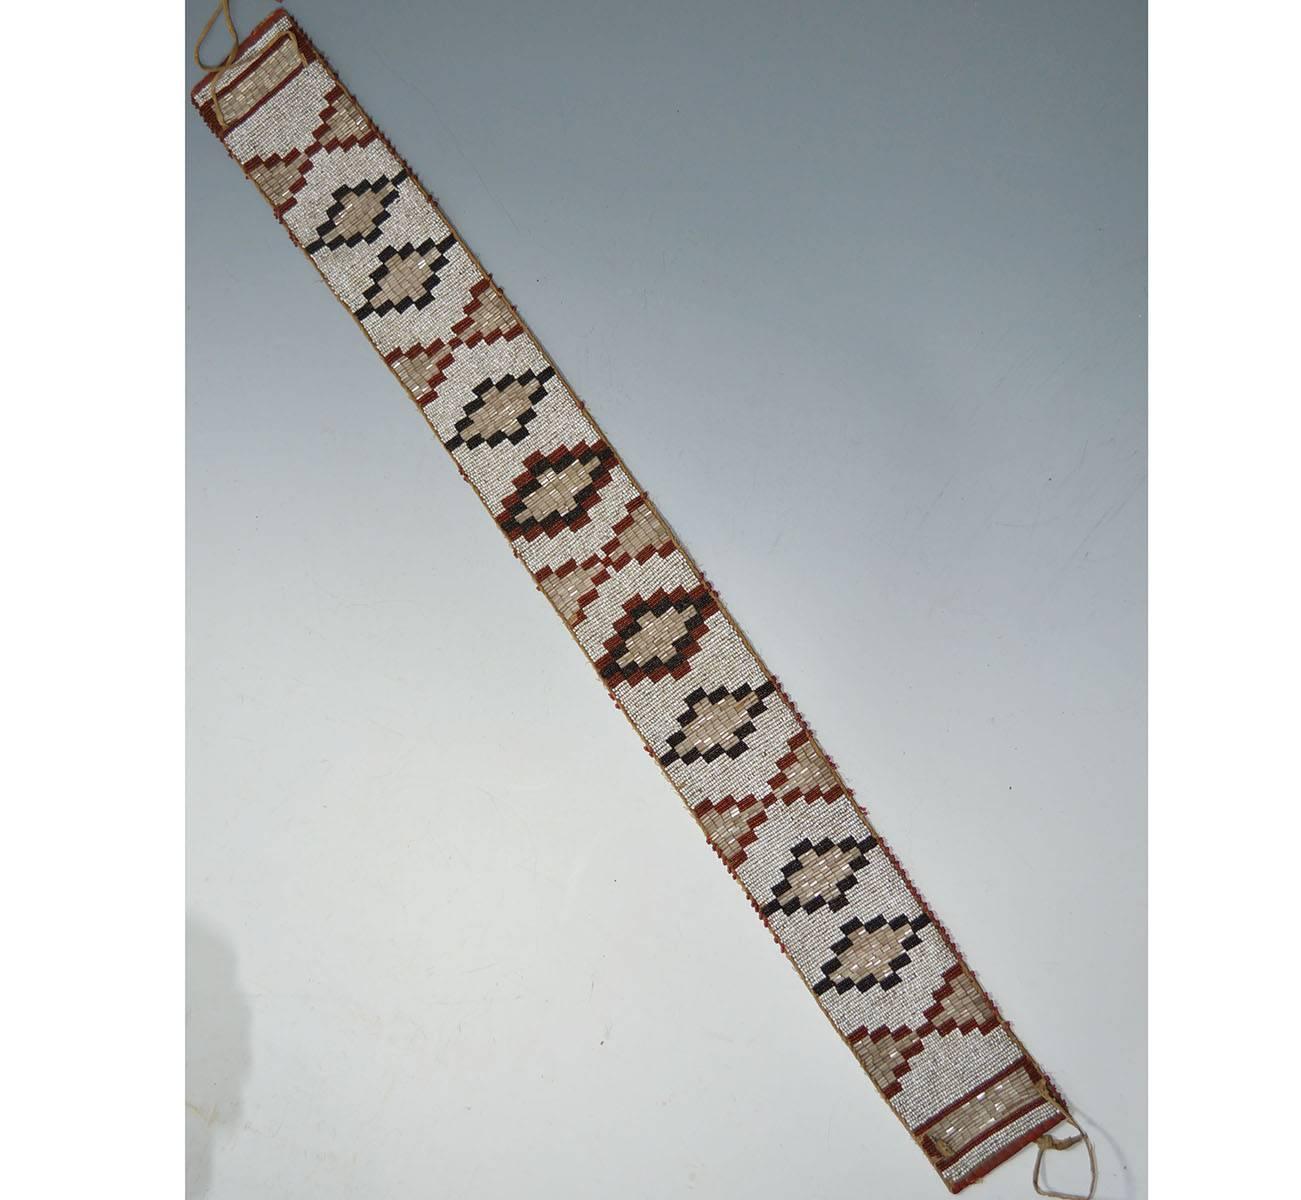 Native American Indian rare blackfoot beaded belt
A very fine and rare old belt in geometric pattern with the inclusion of long tubular beads
Cloth backed with buck skin fasteners
Very fine bead work in excellent condition.
Period: Last quarter